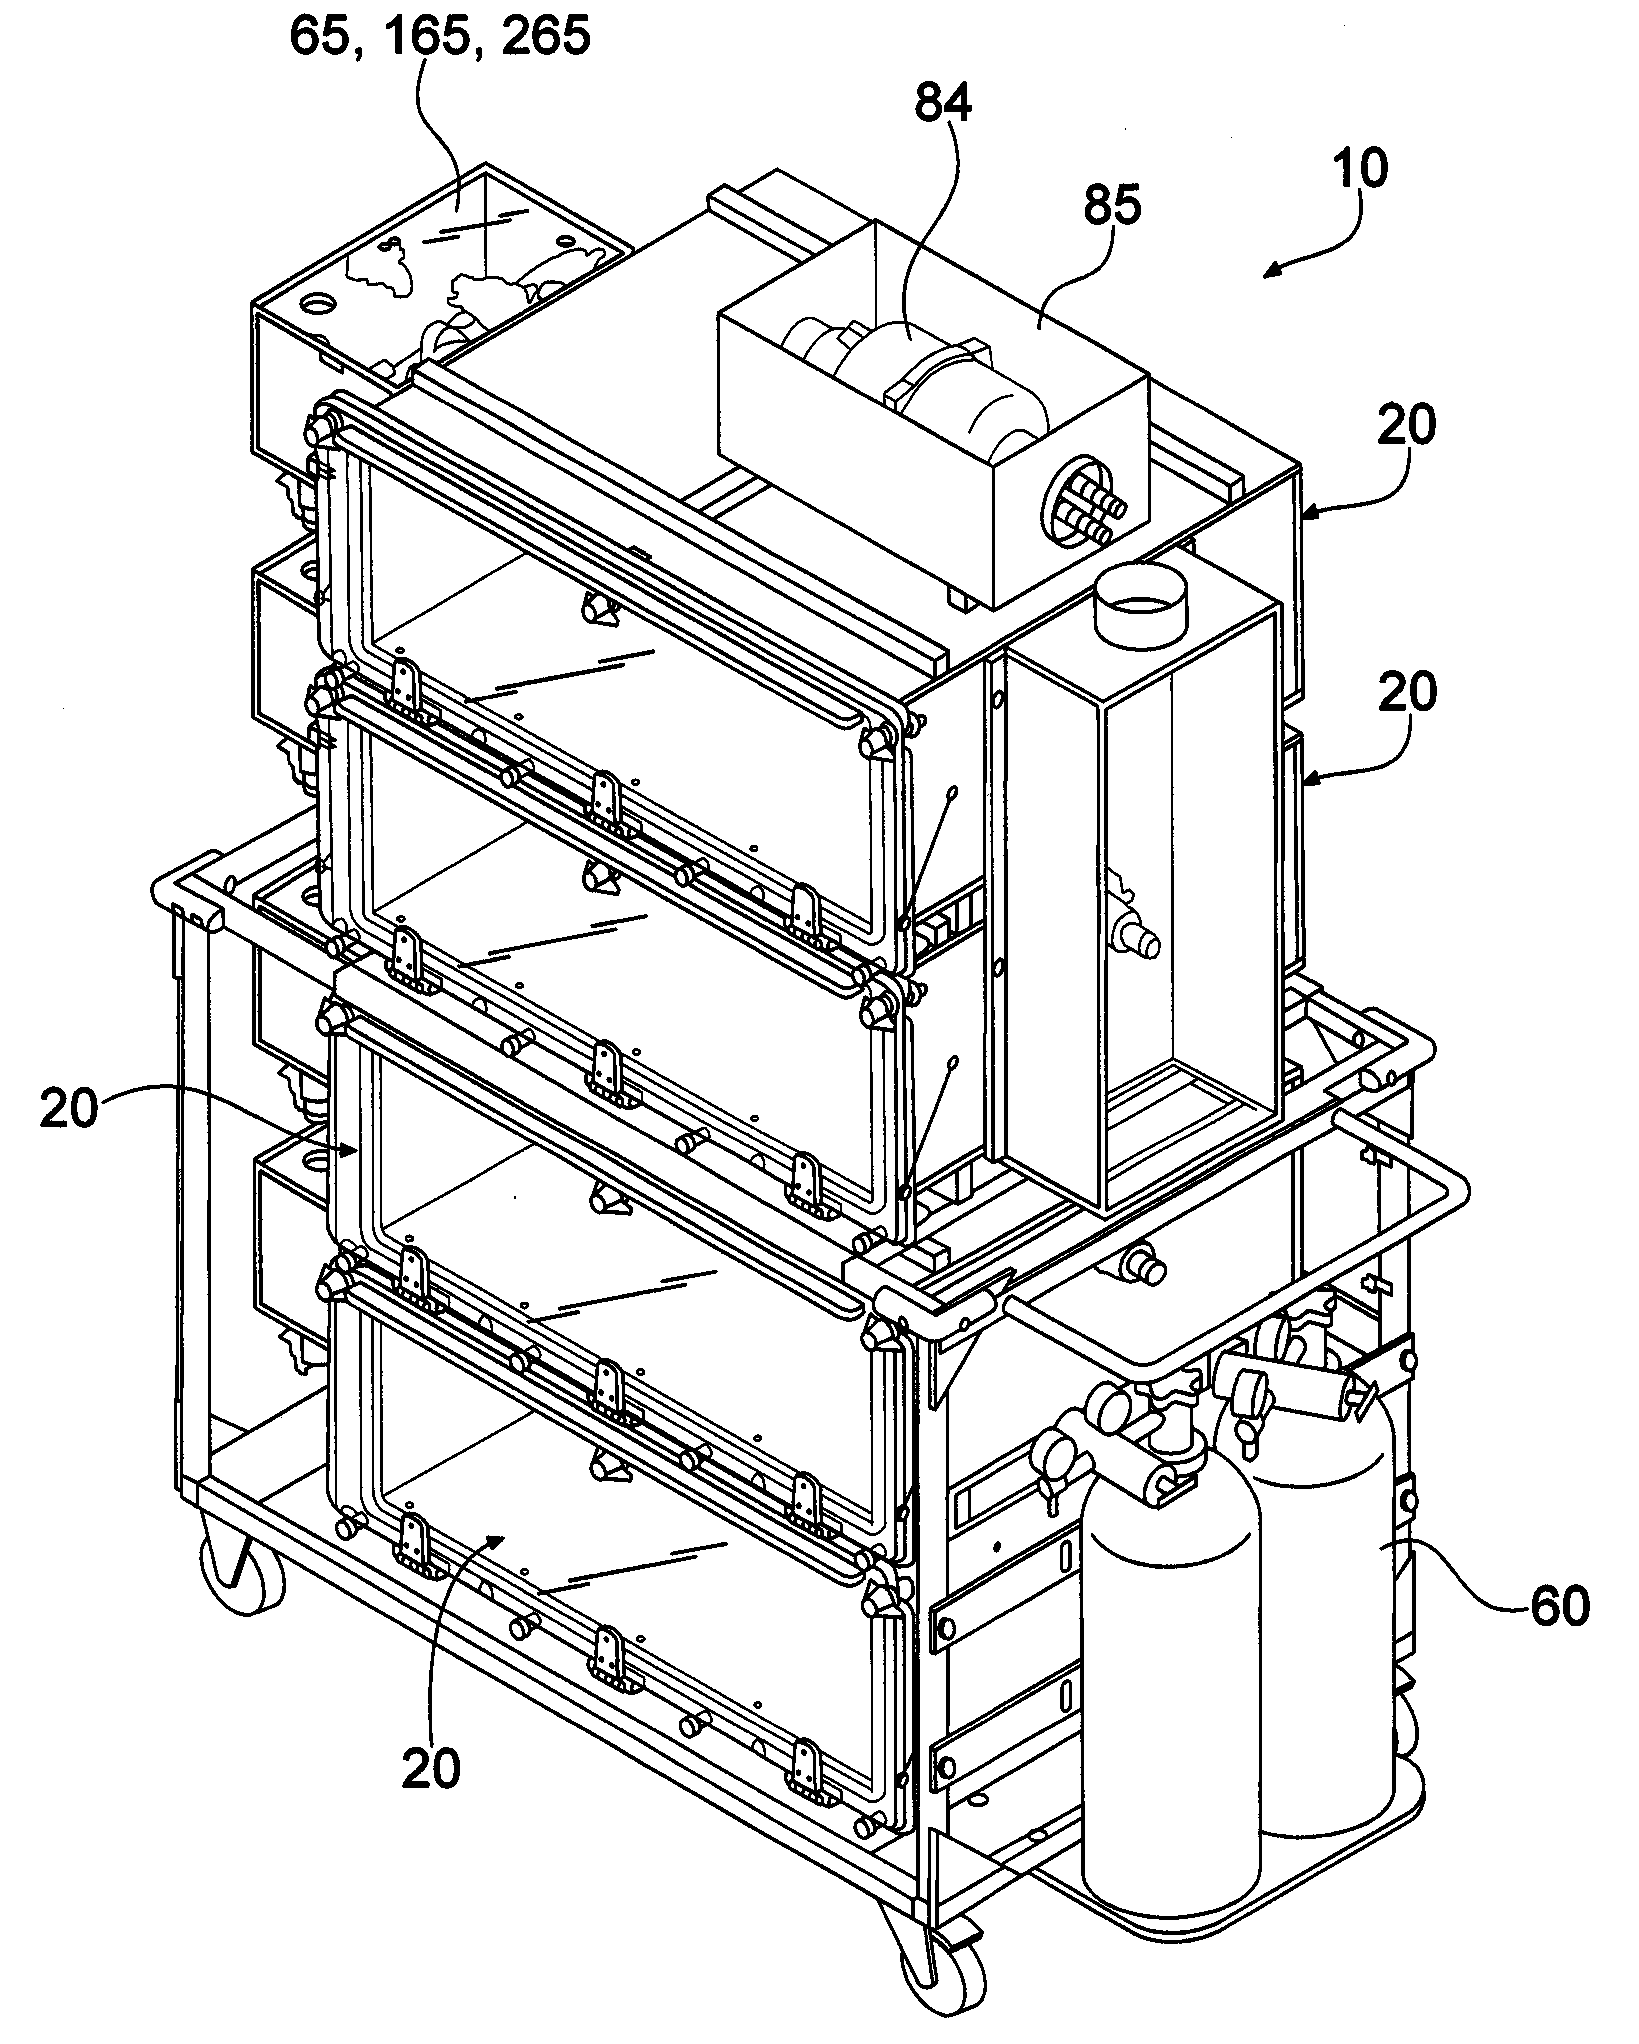 Method and Apparatus for Euthanizing Animals